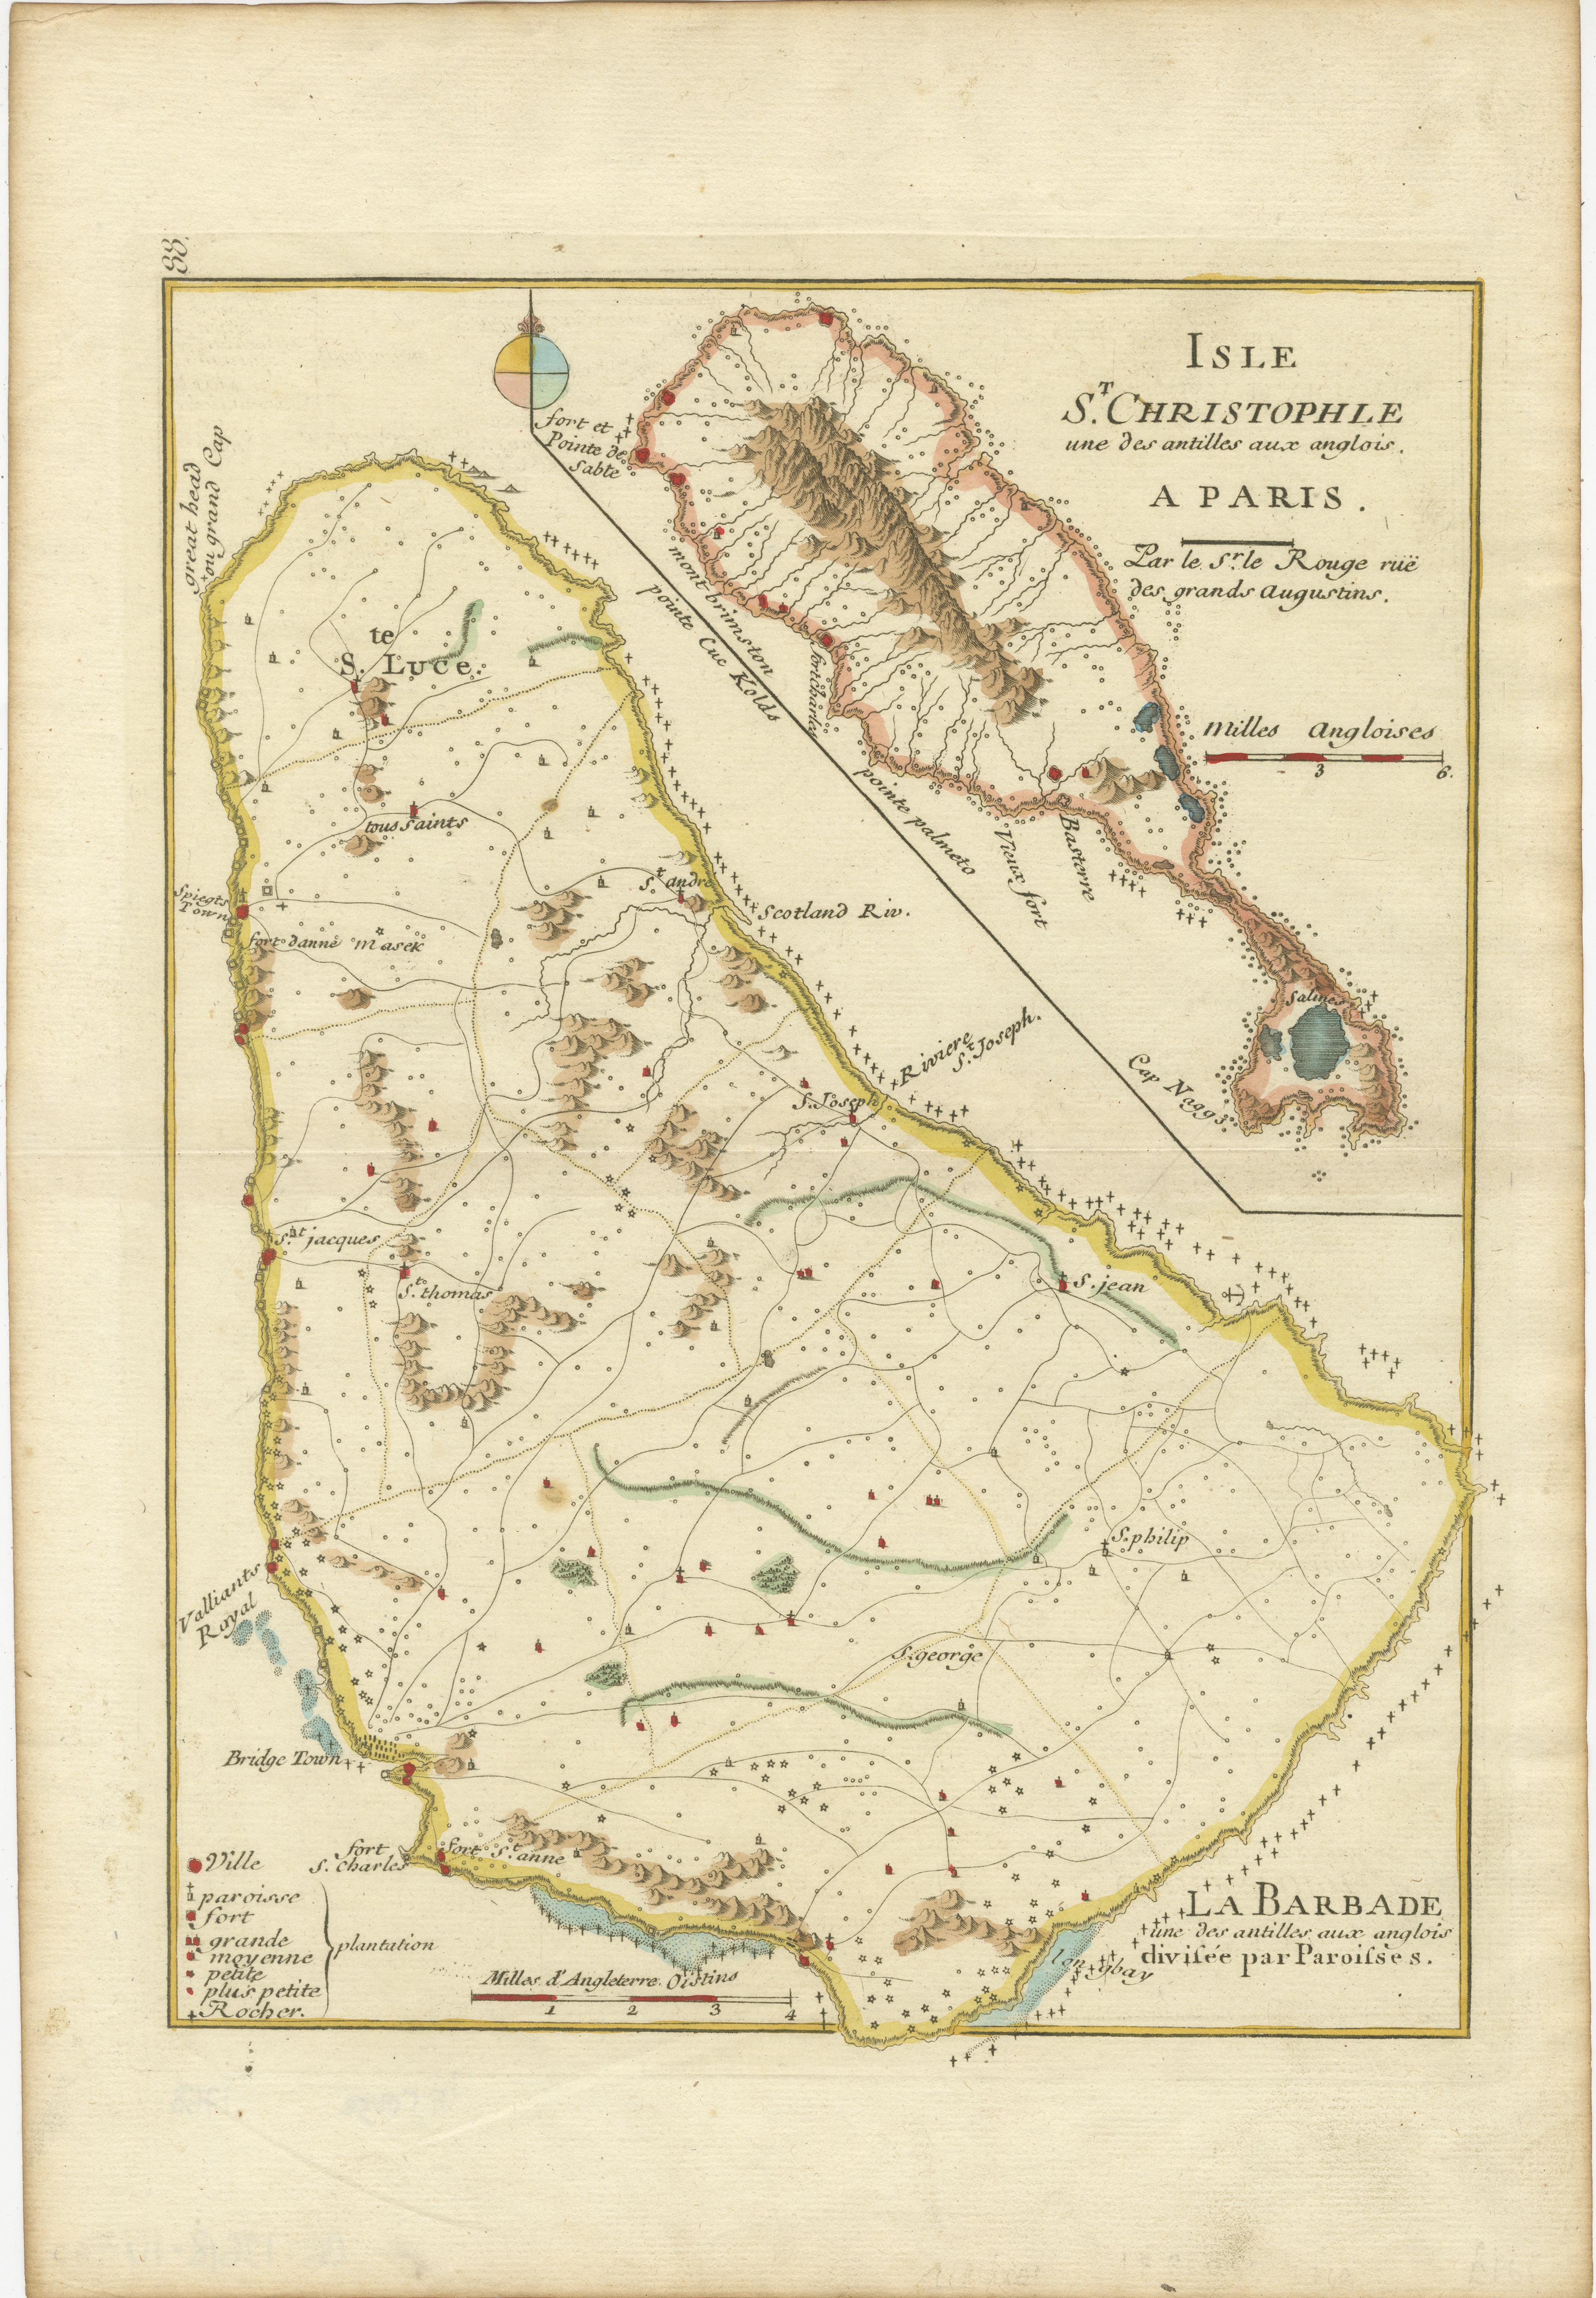 This original map, a copperplate engraving by Le Rouge, presents two significant areas in the Caribbean. Titled 